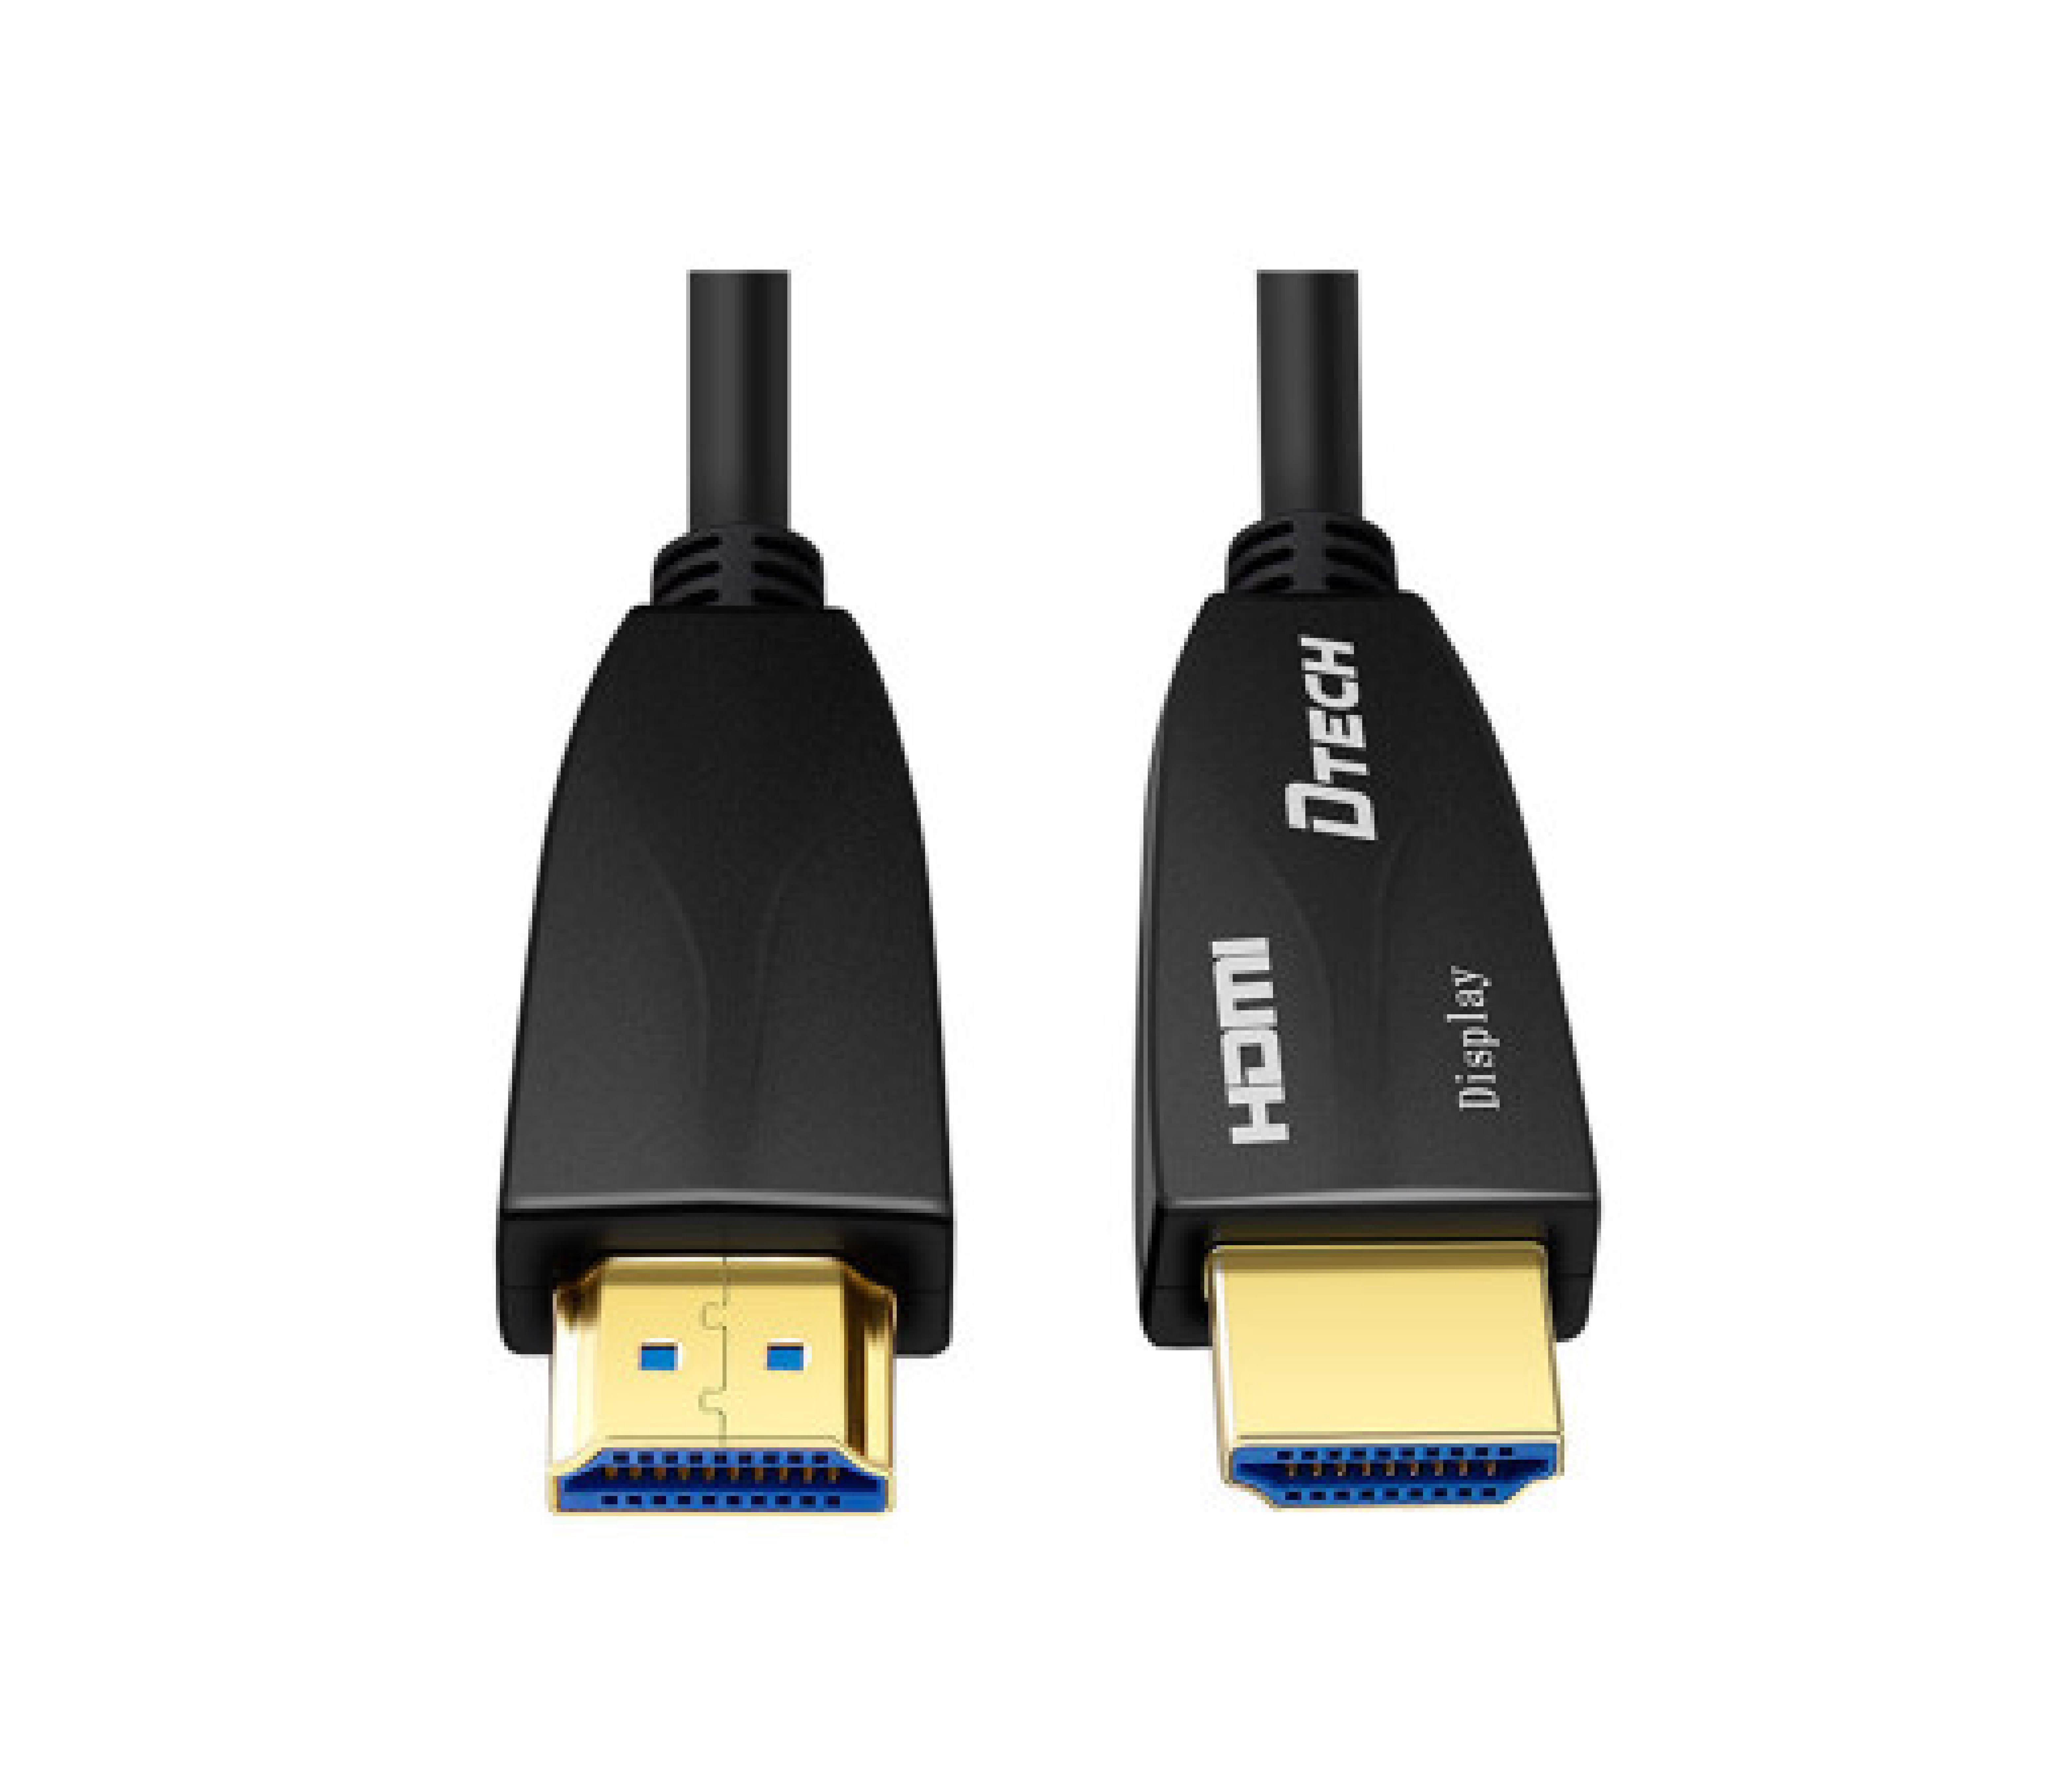 DTECH DT-HF2040 Cable HDMI